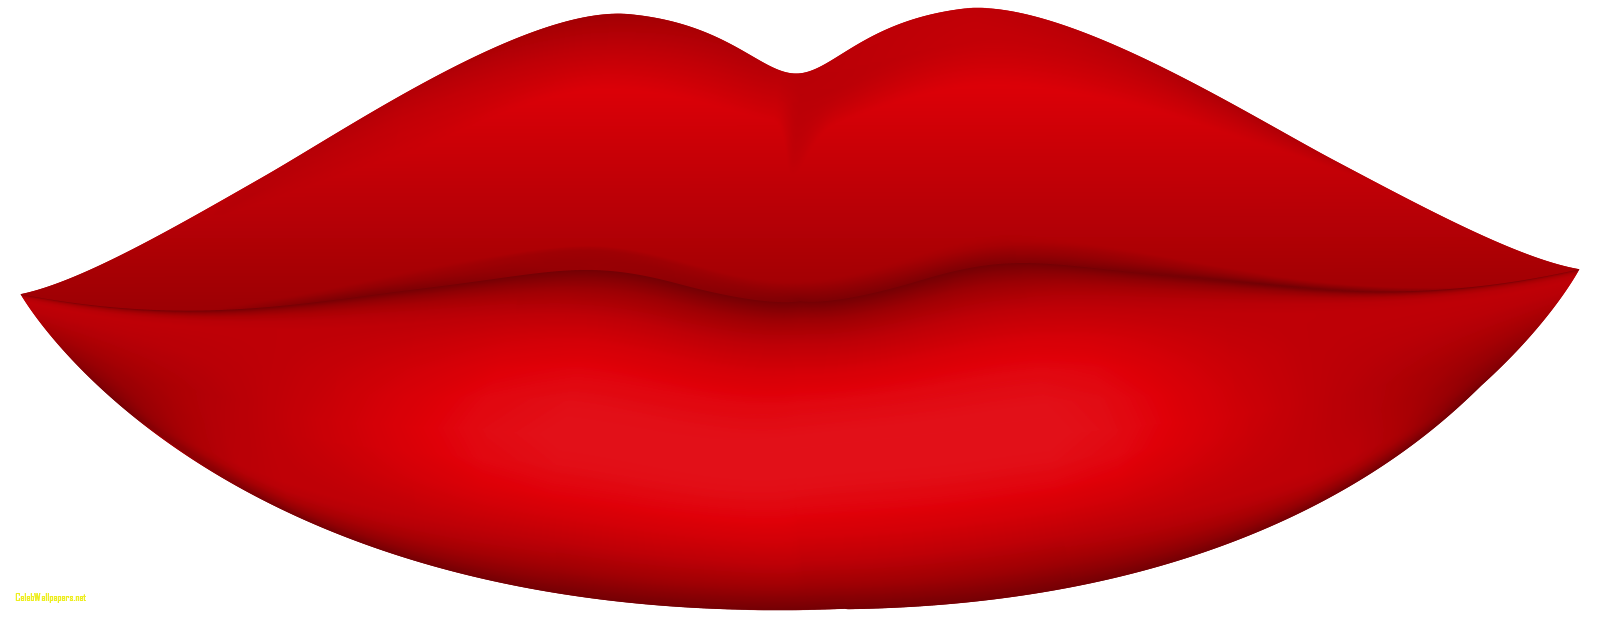 Lips clipart puckered lip. Red png clip art